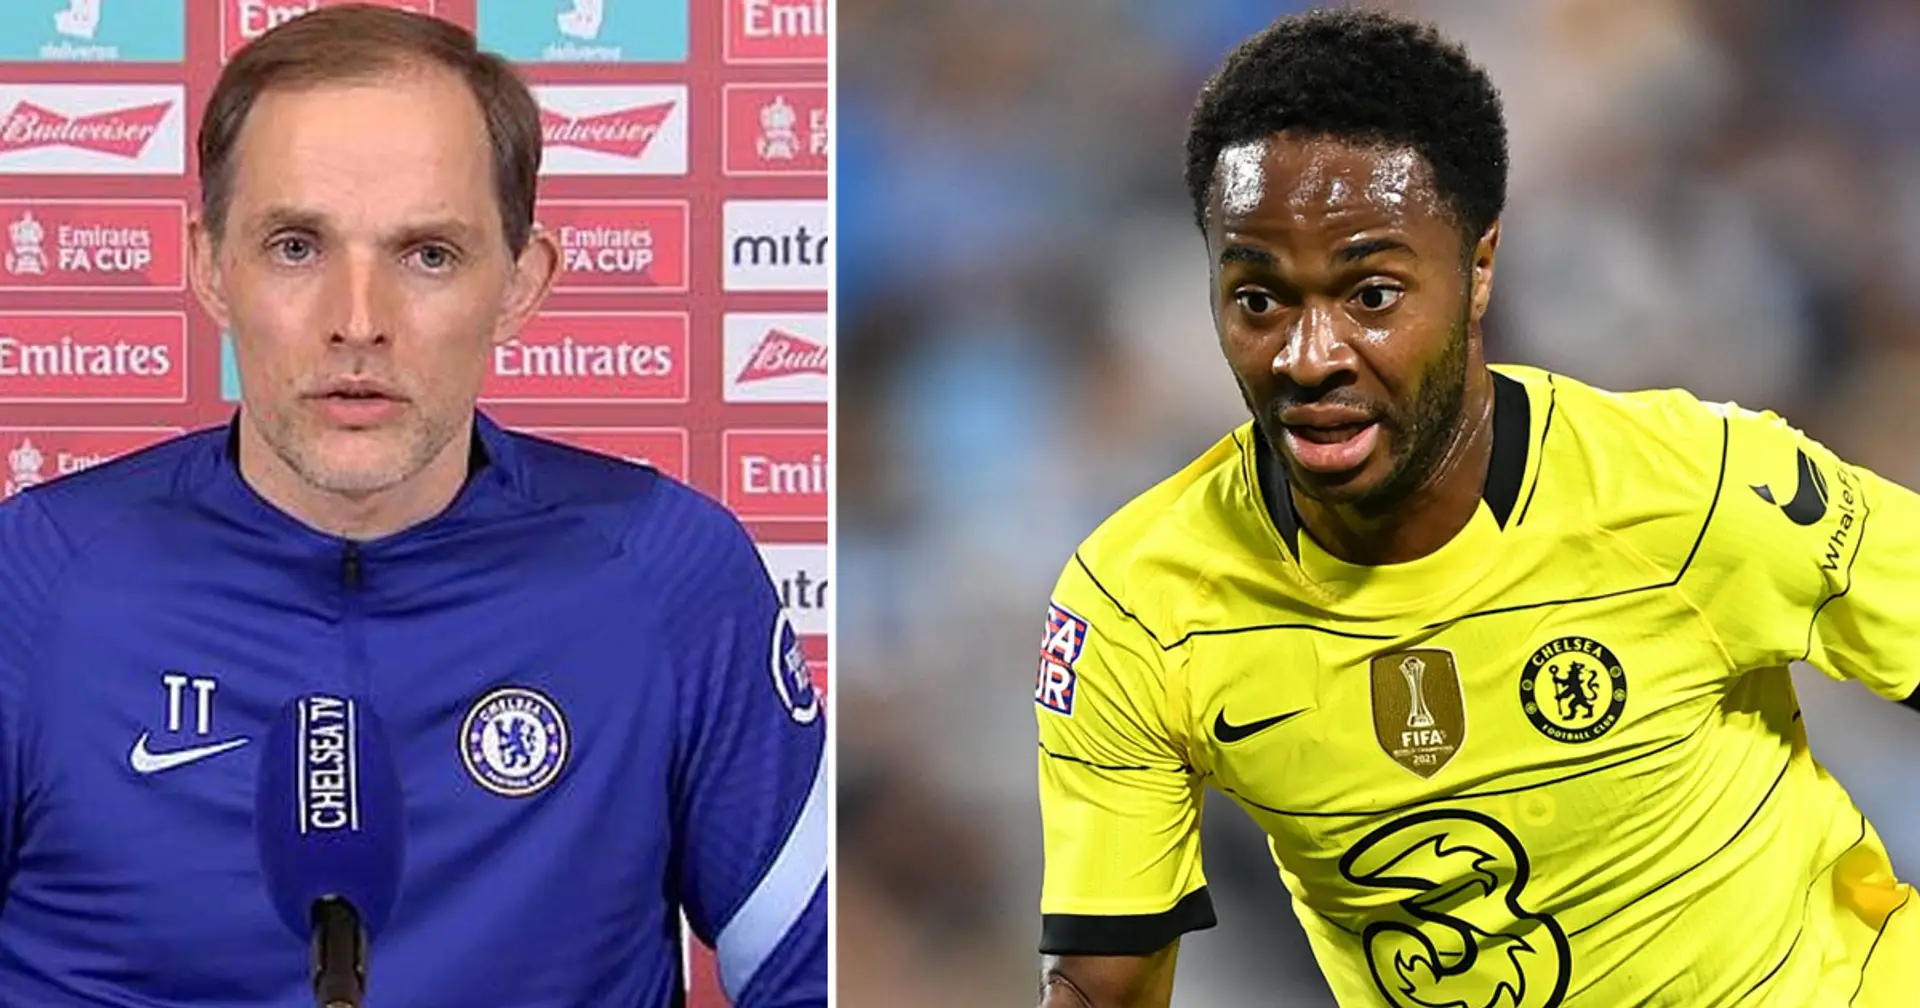 Tuchel comments on Sterling debut, names one positive